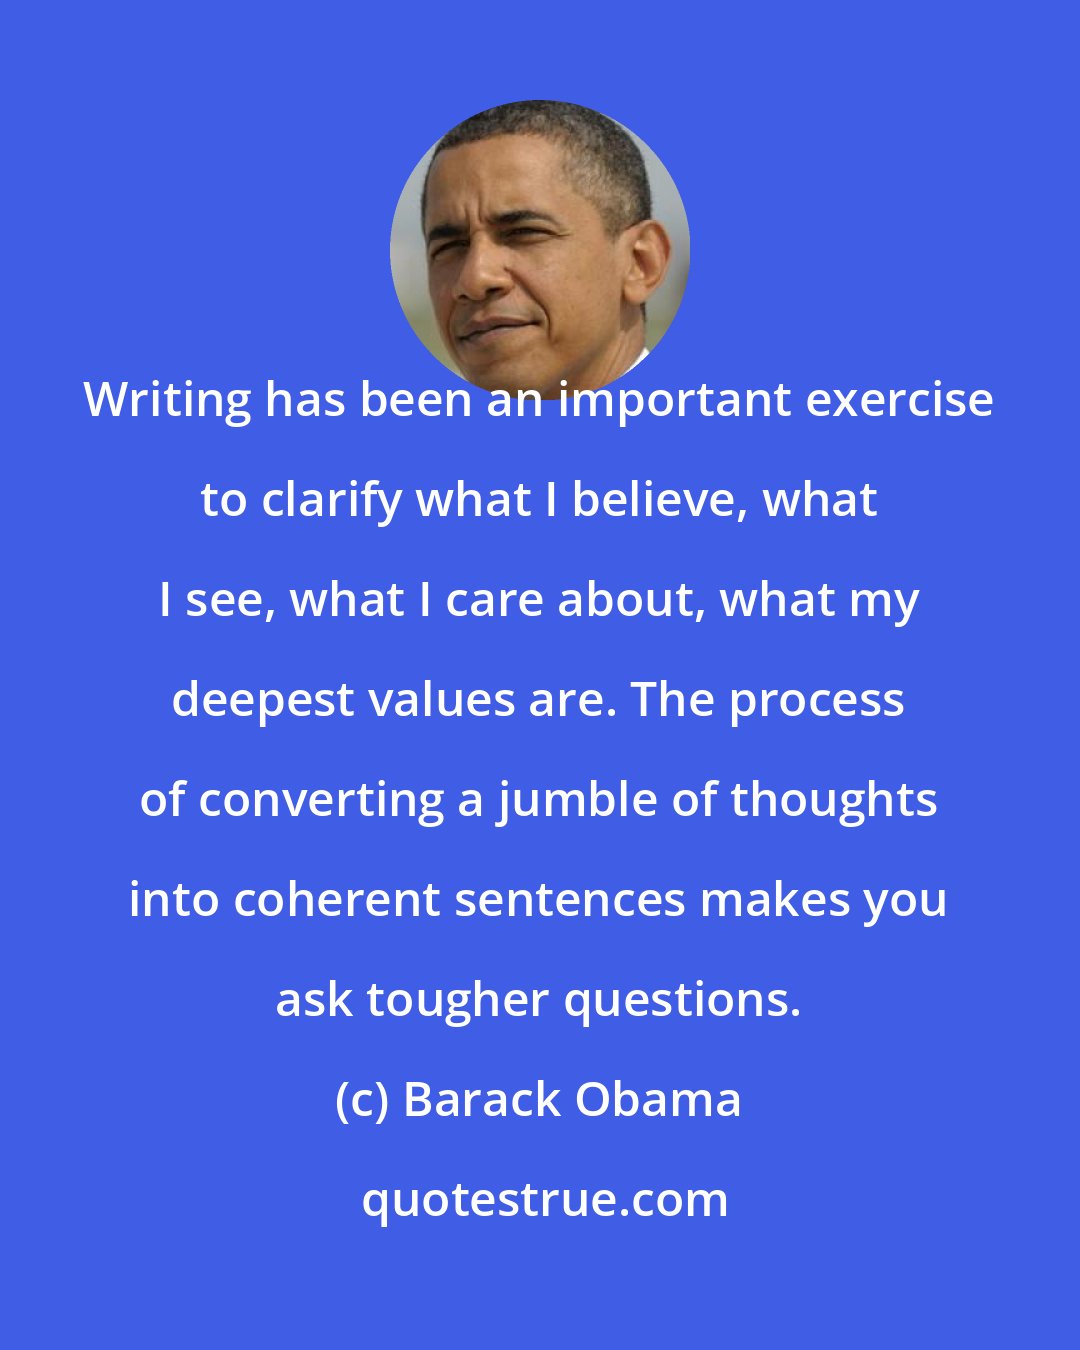 Barack Obama: Writing has been an important exercise to clarify what I believe, what I see, what I care about, what my deepest values are. The process of converting a jumble of thoughts into coherent sentences makes you ask tougher questions.